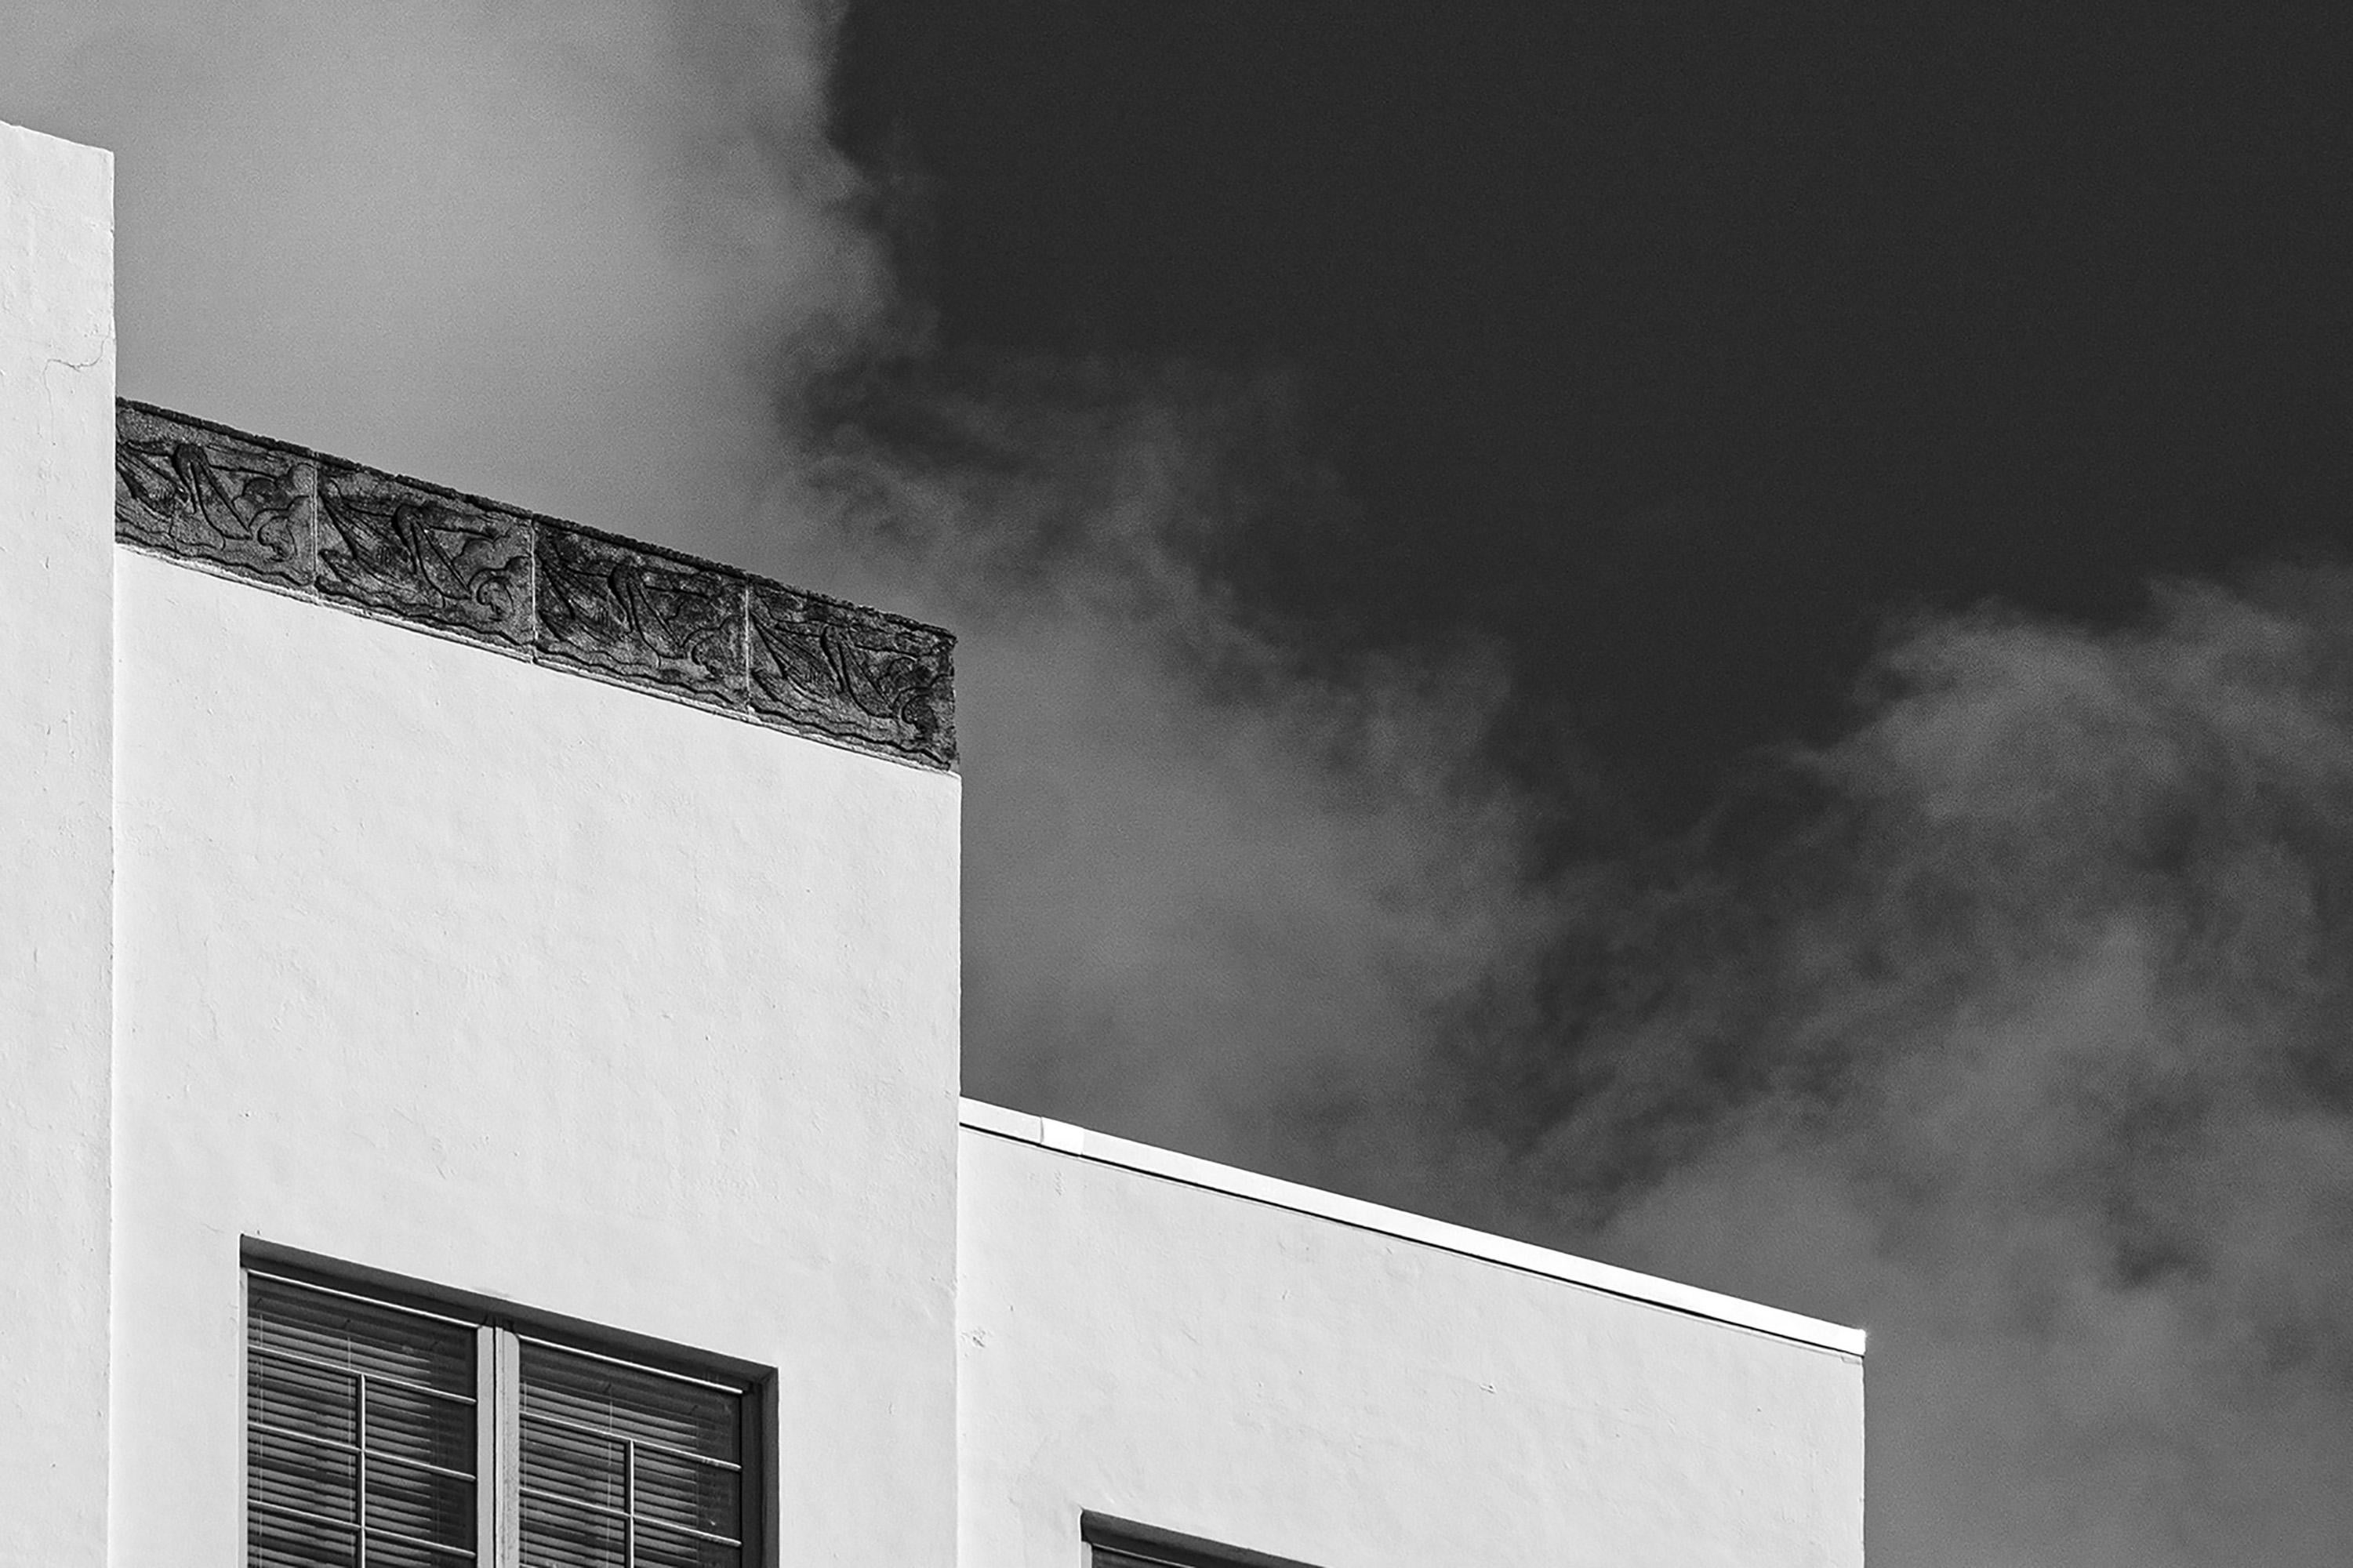 Thirties Building with Sky, Black and White Architecture, Miami Beach Art Deco  1